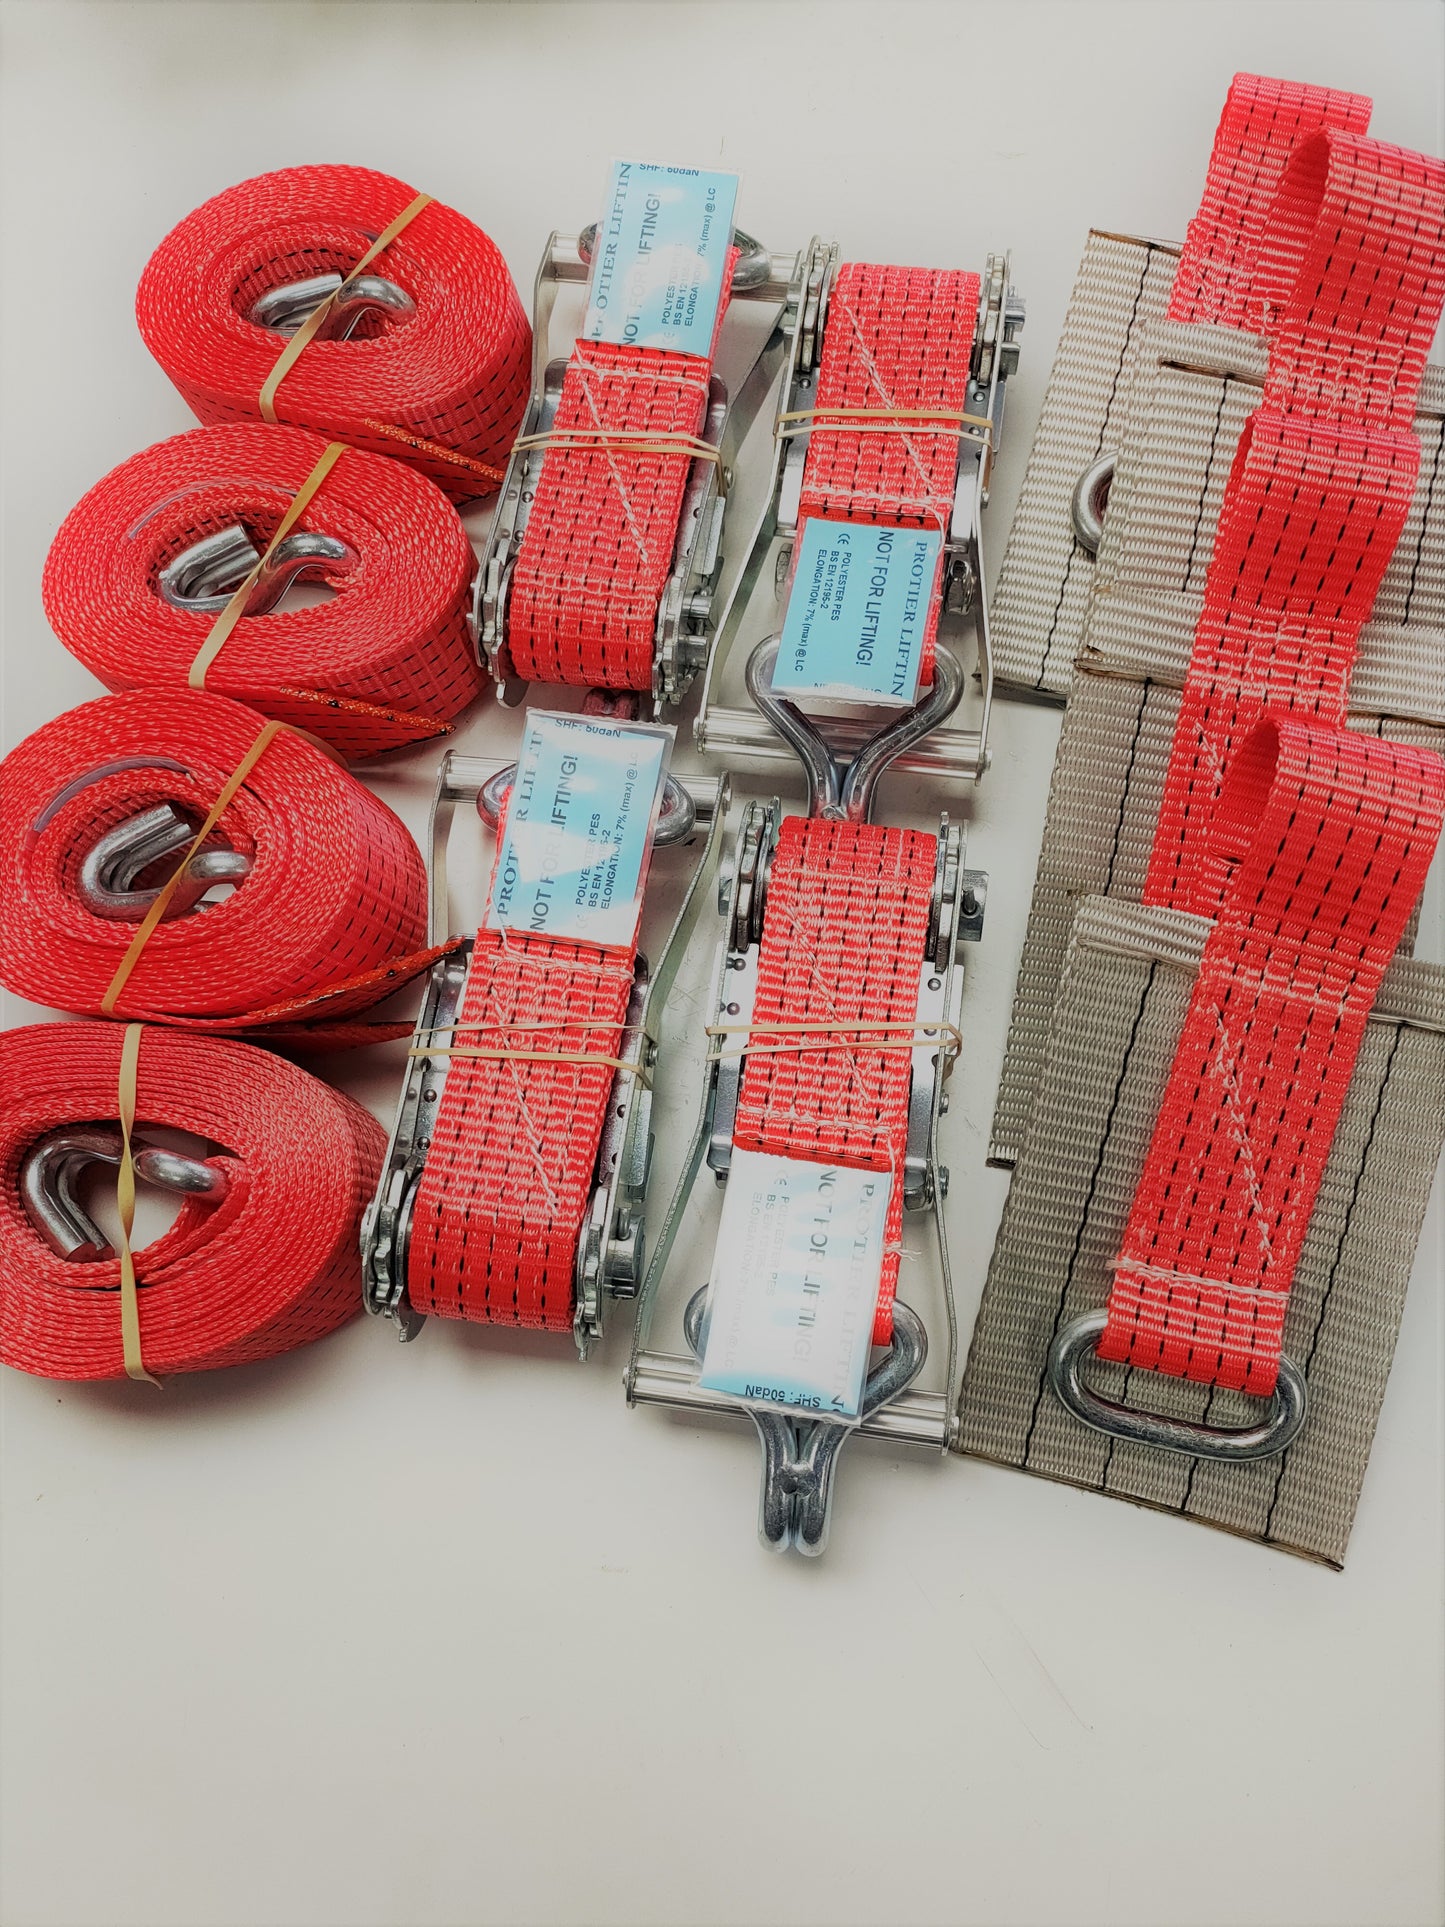 5t_5000kg_car_trailer_transporter_red_small_pad_recovery_straps_set_of_4_image_3